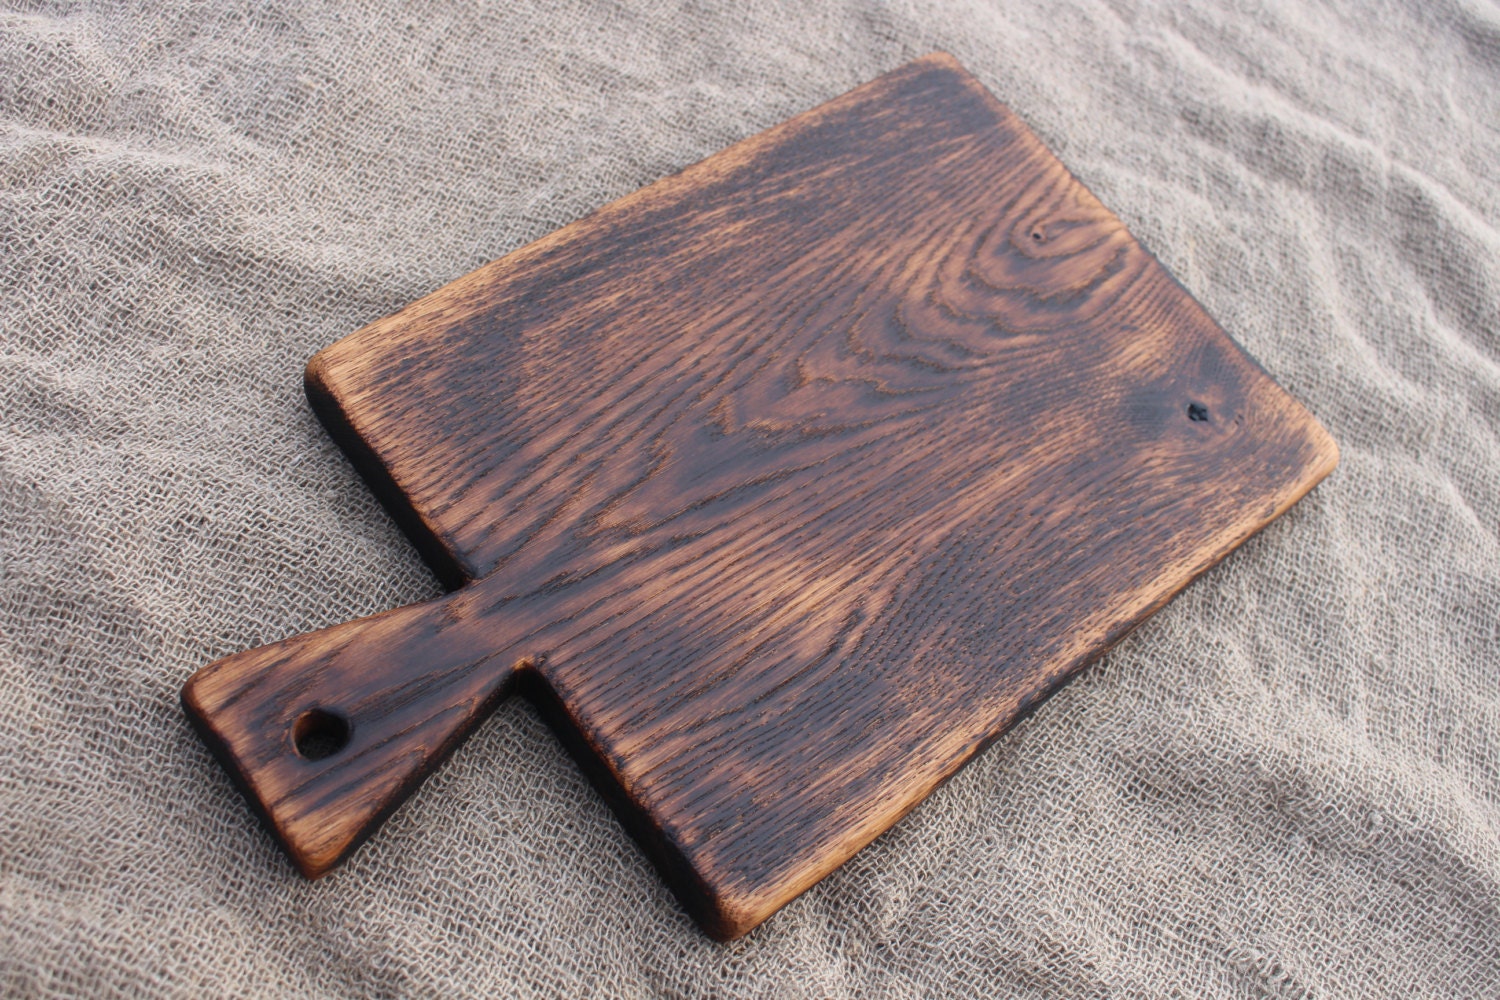 Old Rustic Cutting Board Wooden Serving Board Vintage Wood 